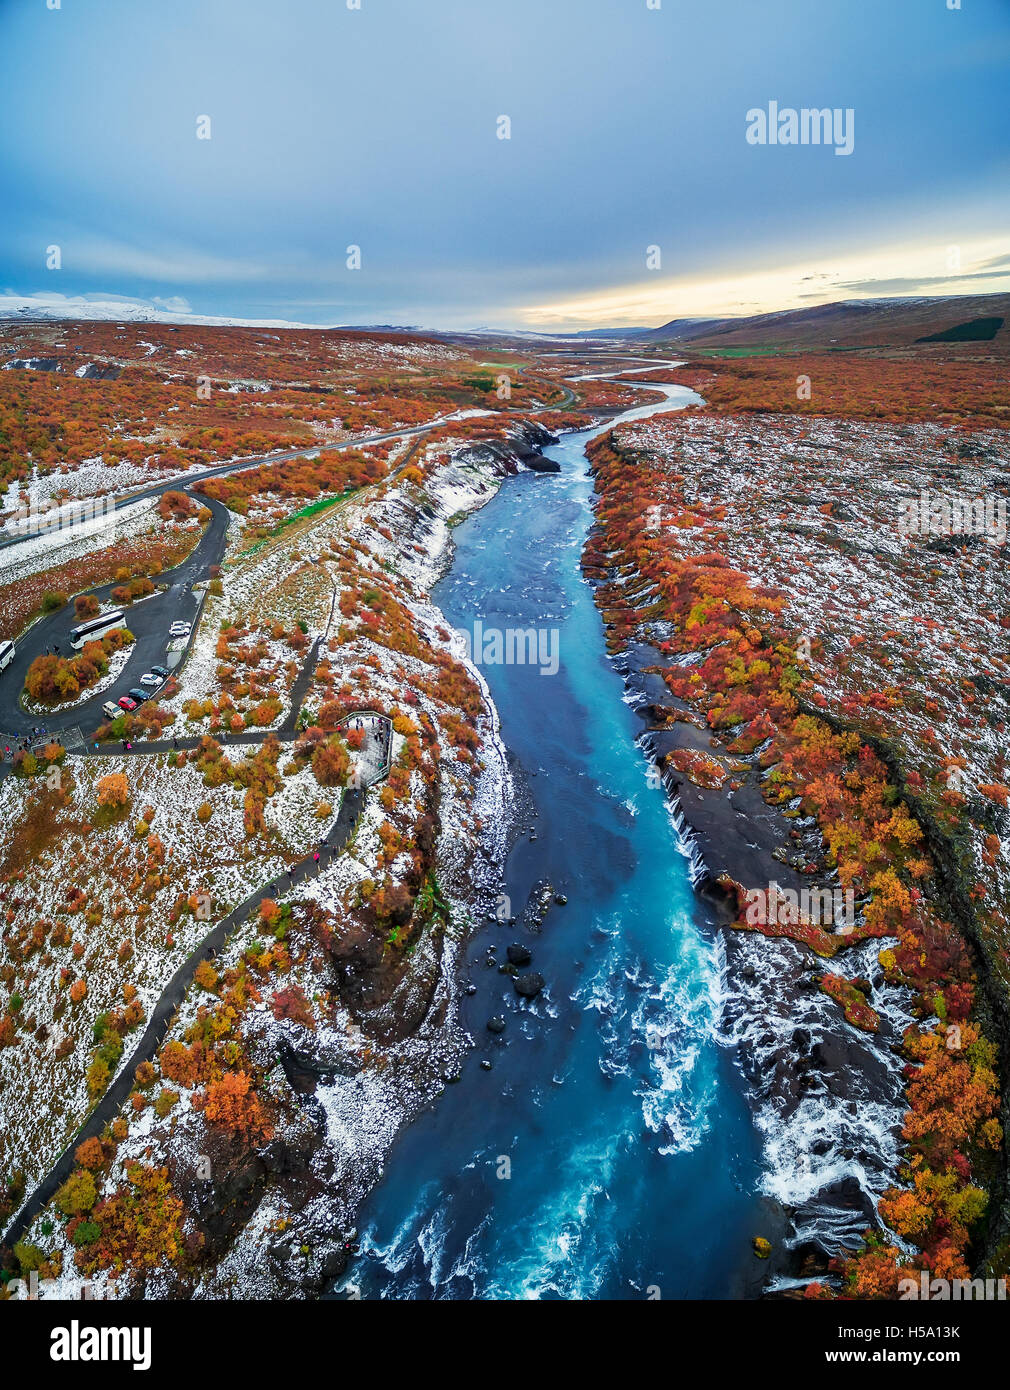 Hraunfossar waterfalls in the autumn, Borgafjordur, Iceland. This image is shot using a drone. Stock Photo